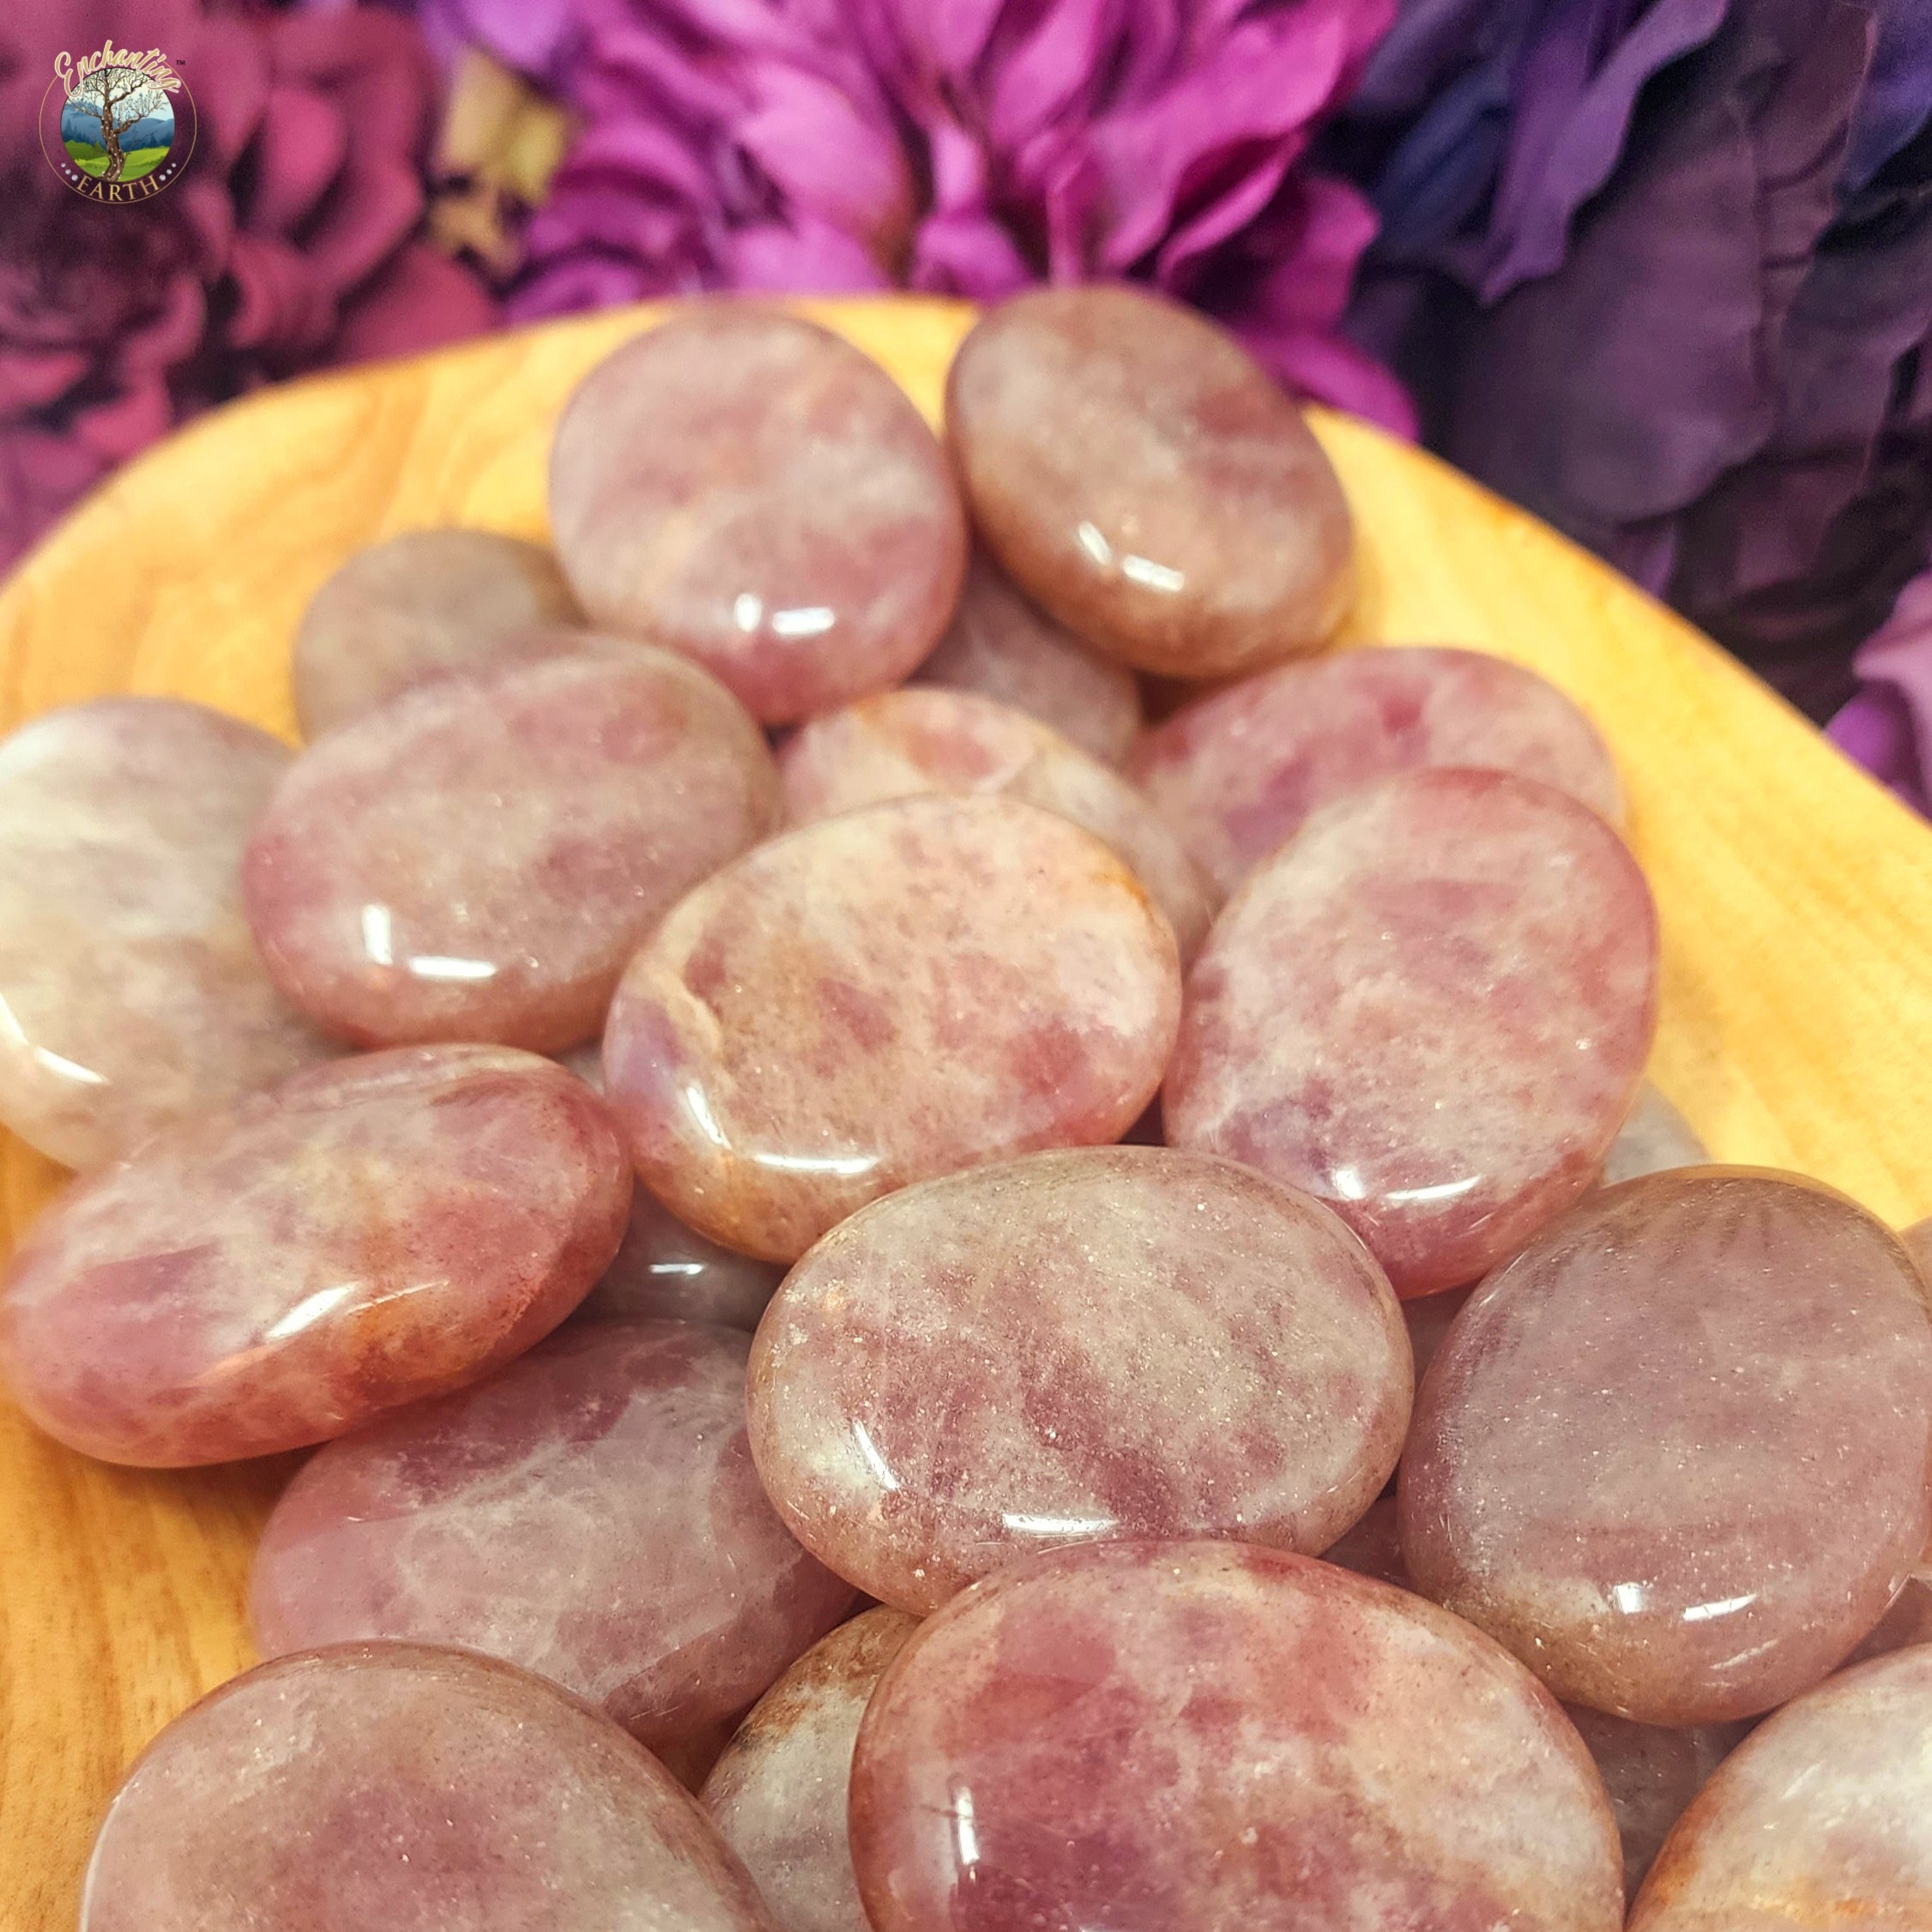 Red Aventurine Palm Stone for Focus, Inspiration and Passion